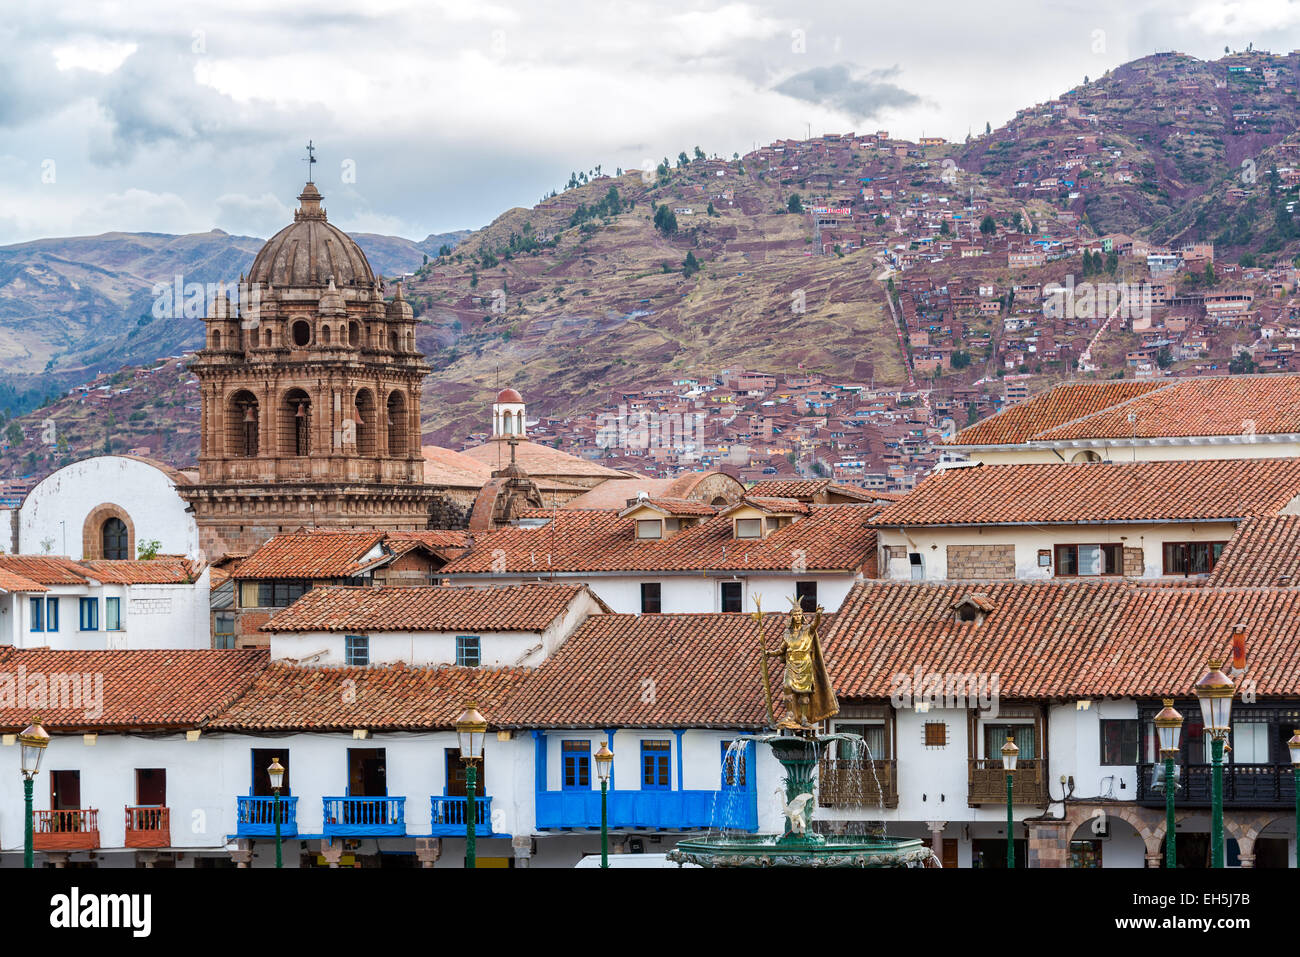 View from the Plaza de Armas in the center of Cuzco, Peru Stock Photo